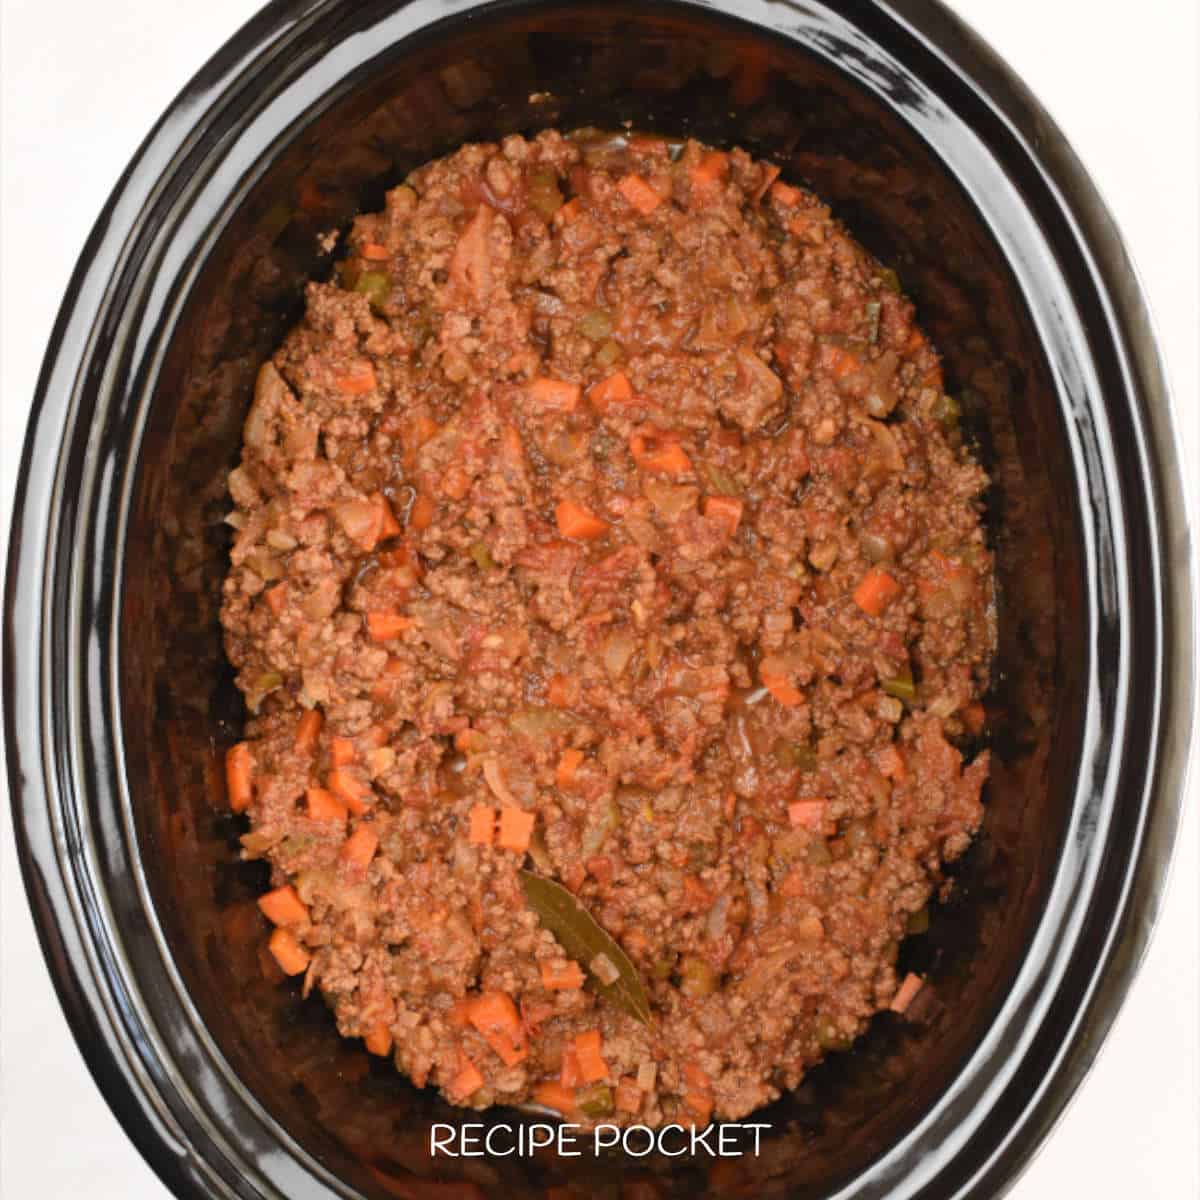 Cooked bolognese sauce in a black slow cooker bowl.